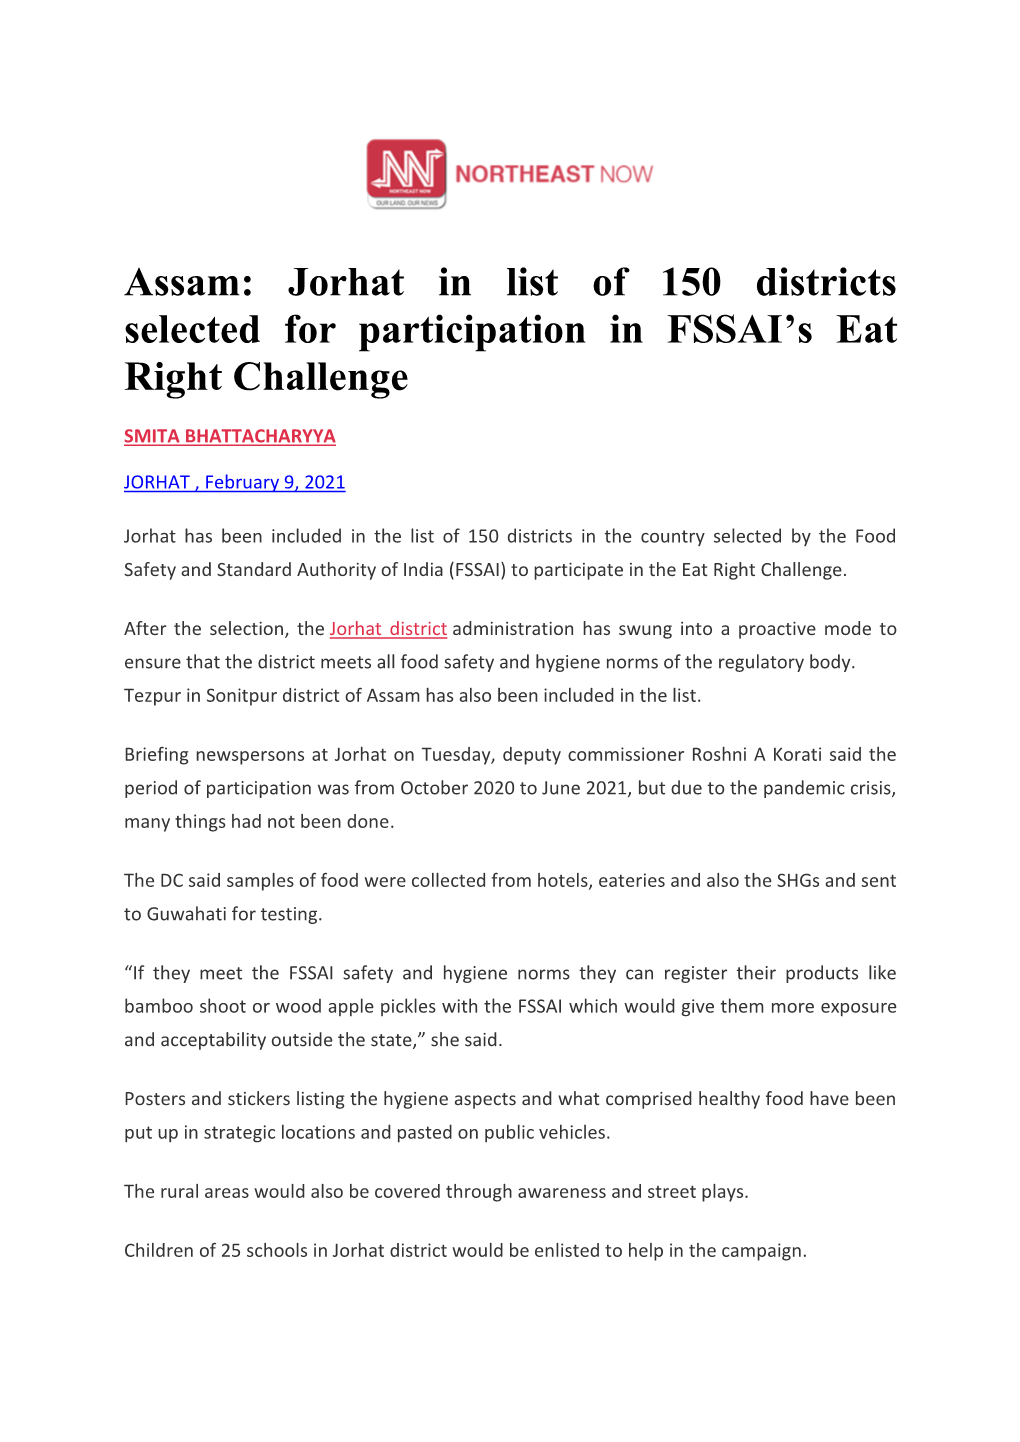 Jorhat in List of 150 Districts Selected for Participation in FSSAI's Eat Right